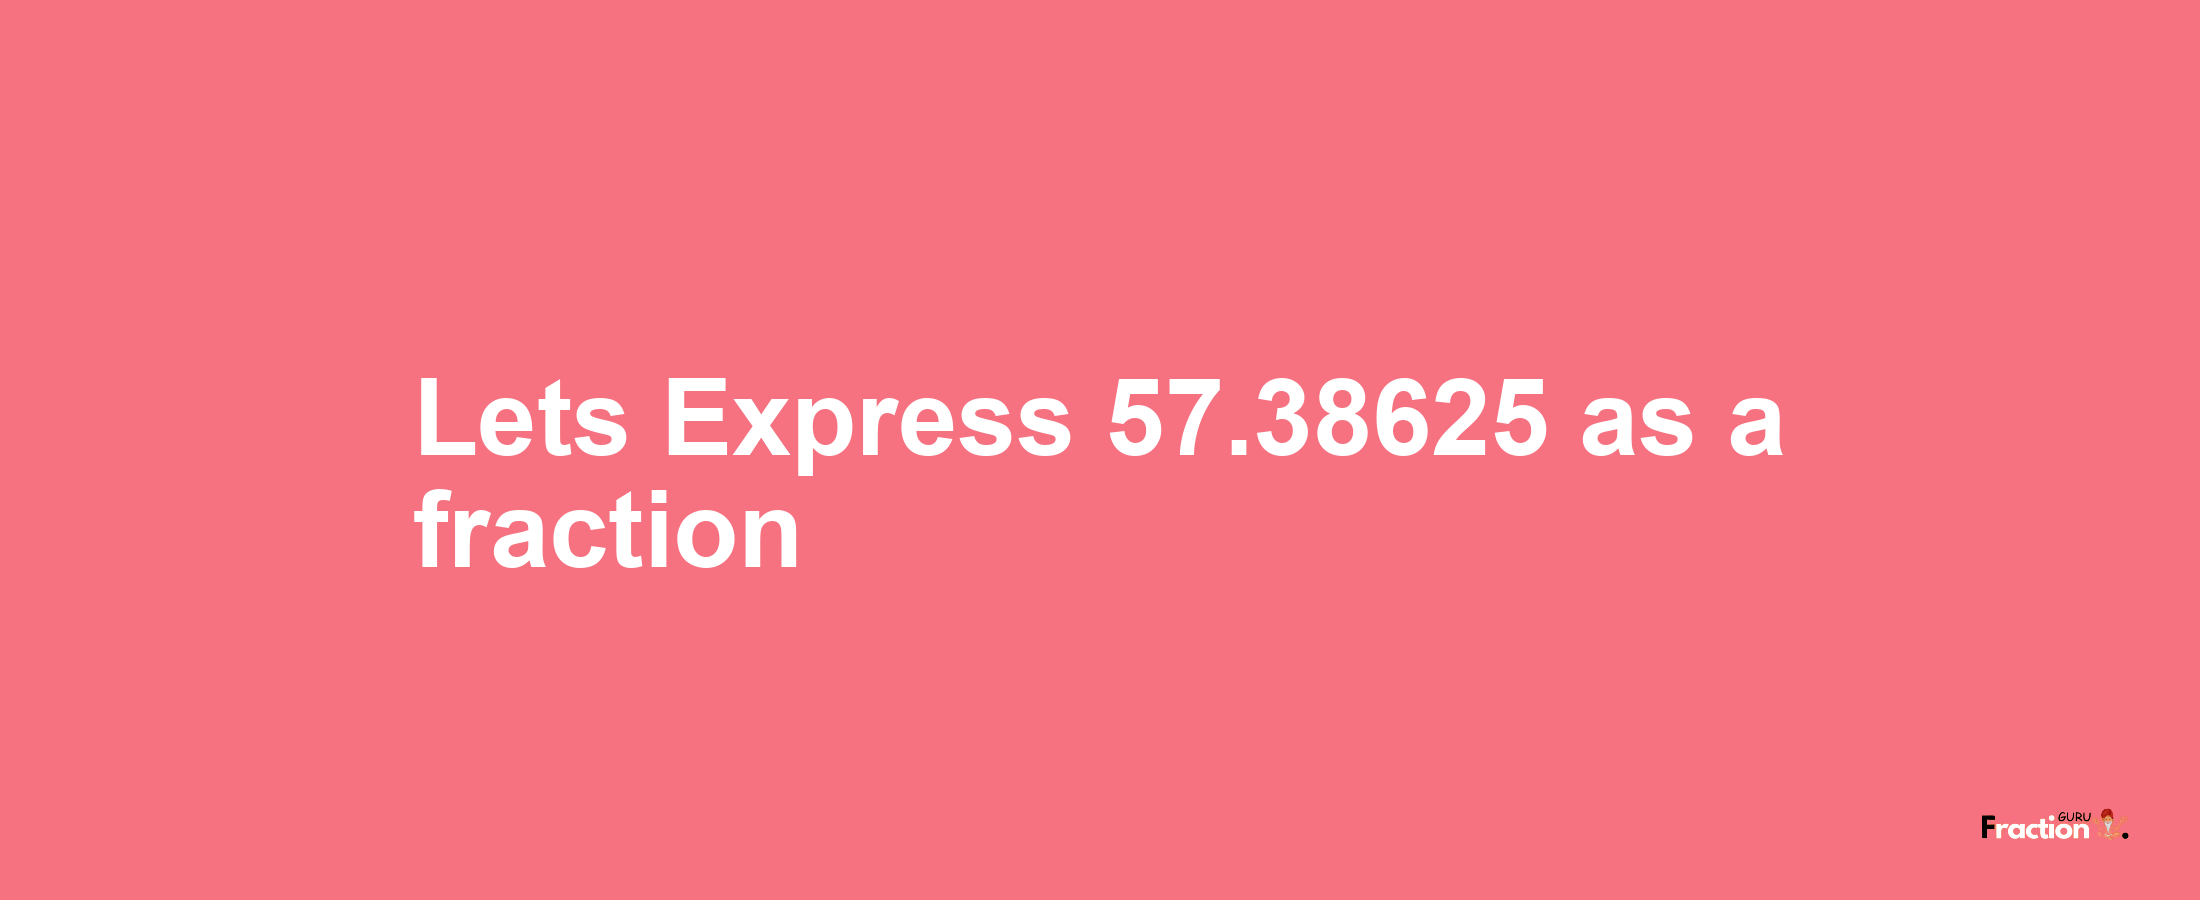 Lets Express 57.38625 as afraction